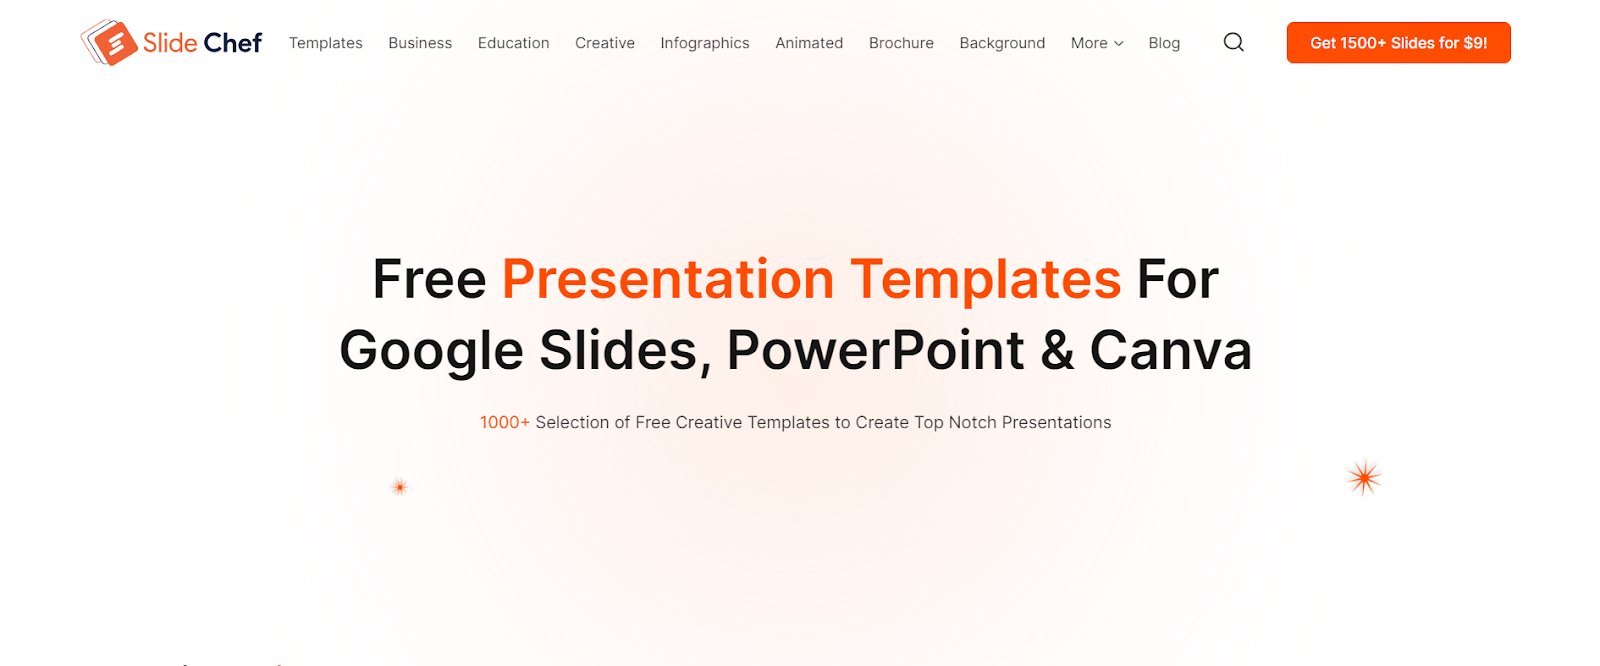 template for powerpoint presentation free download